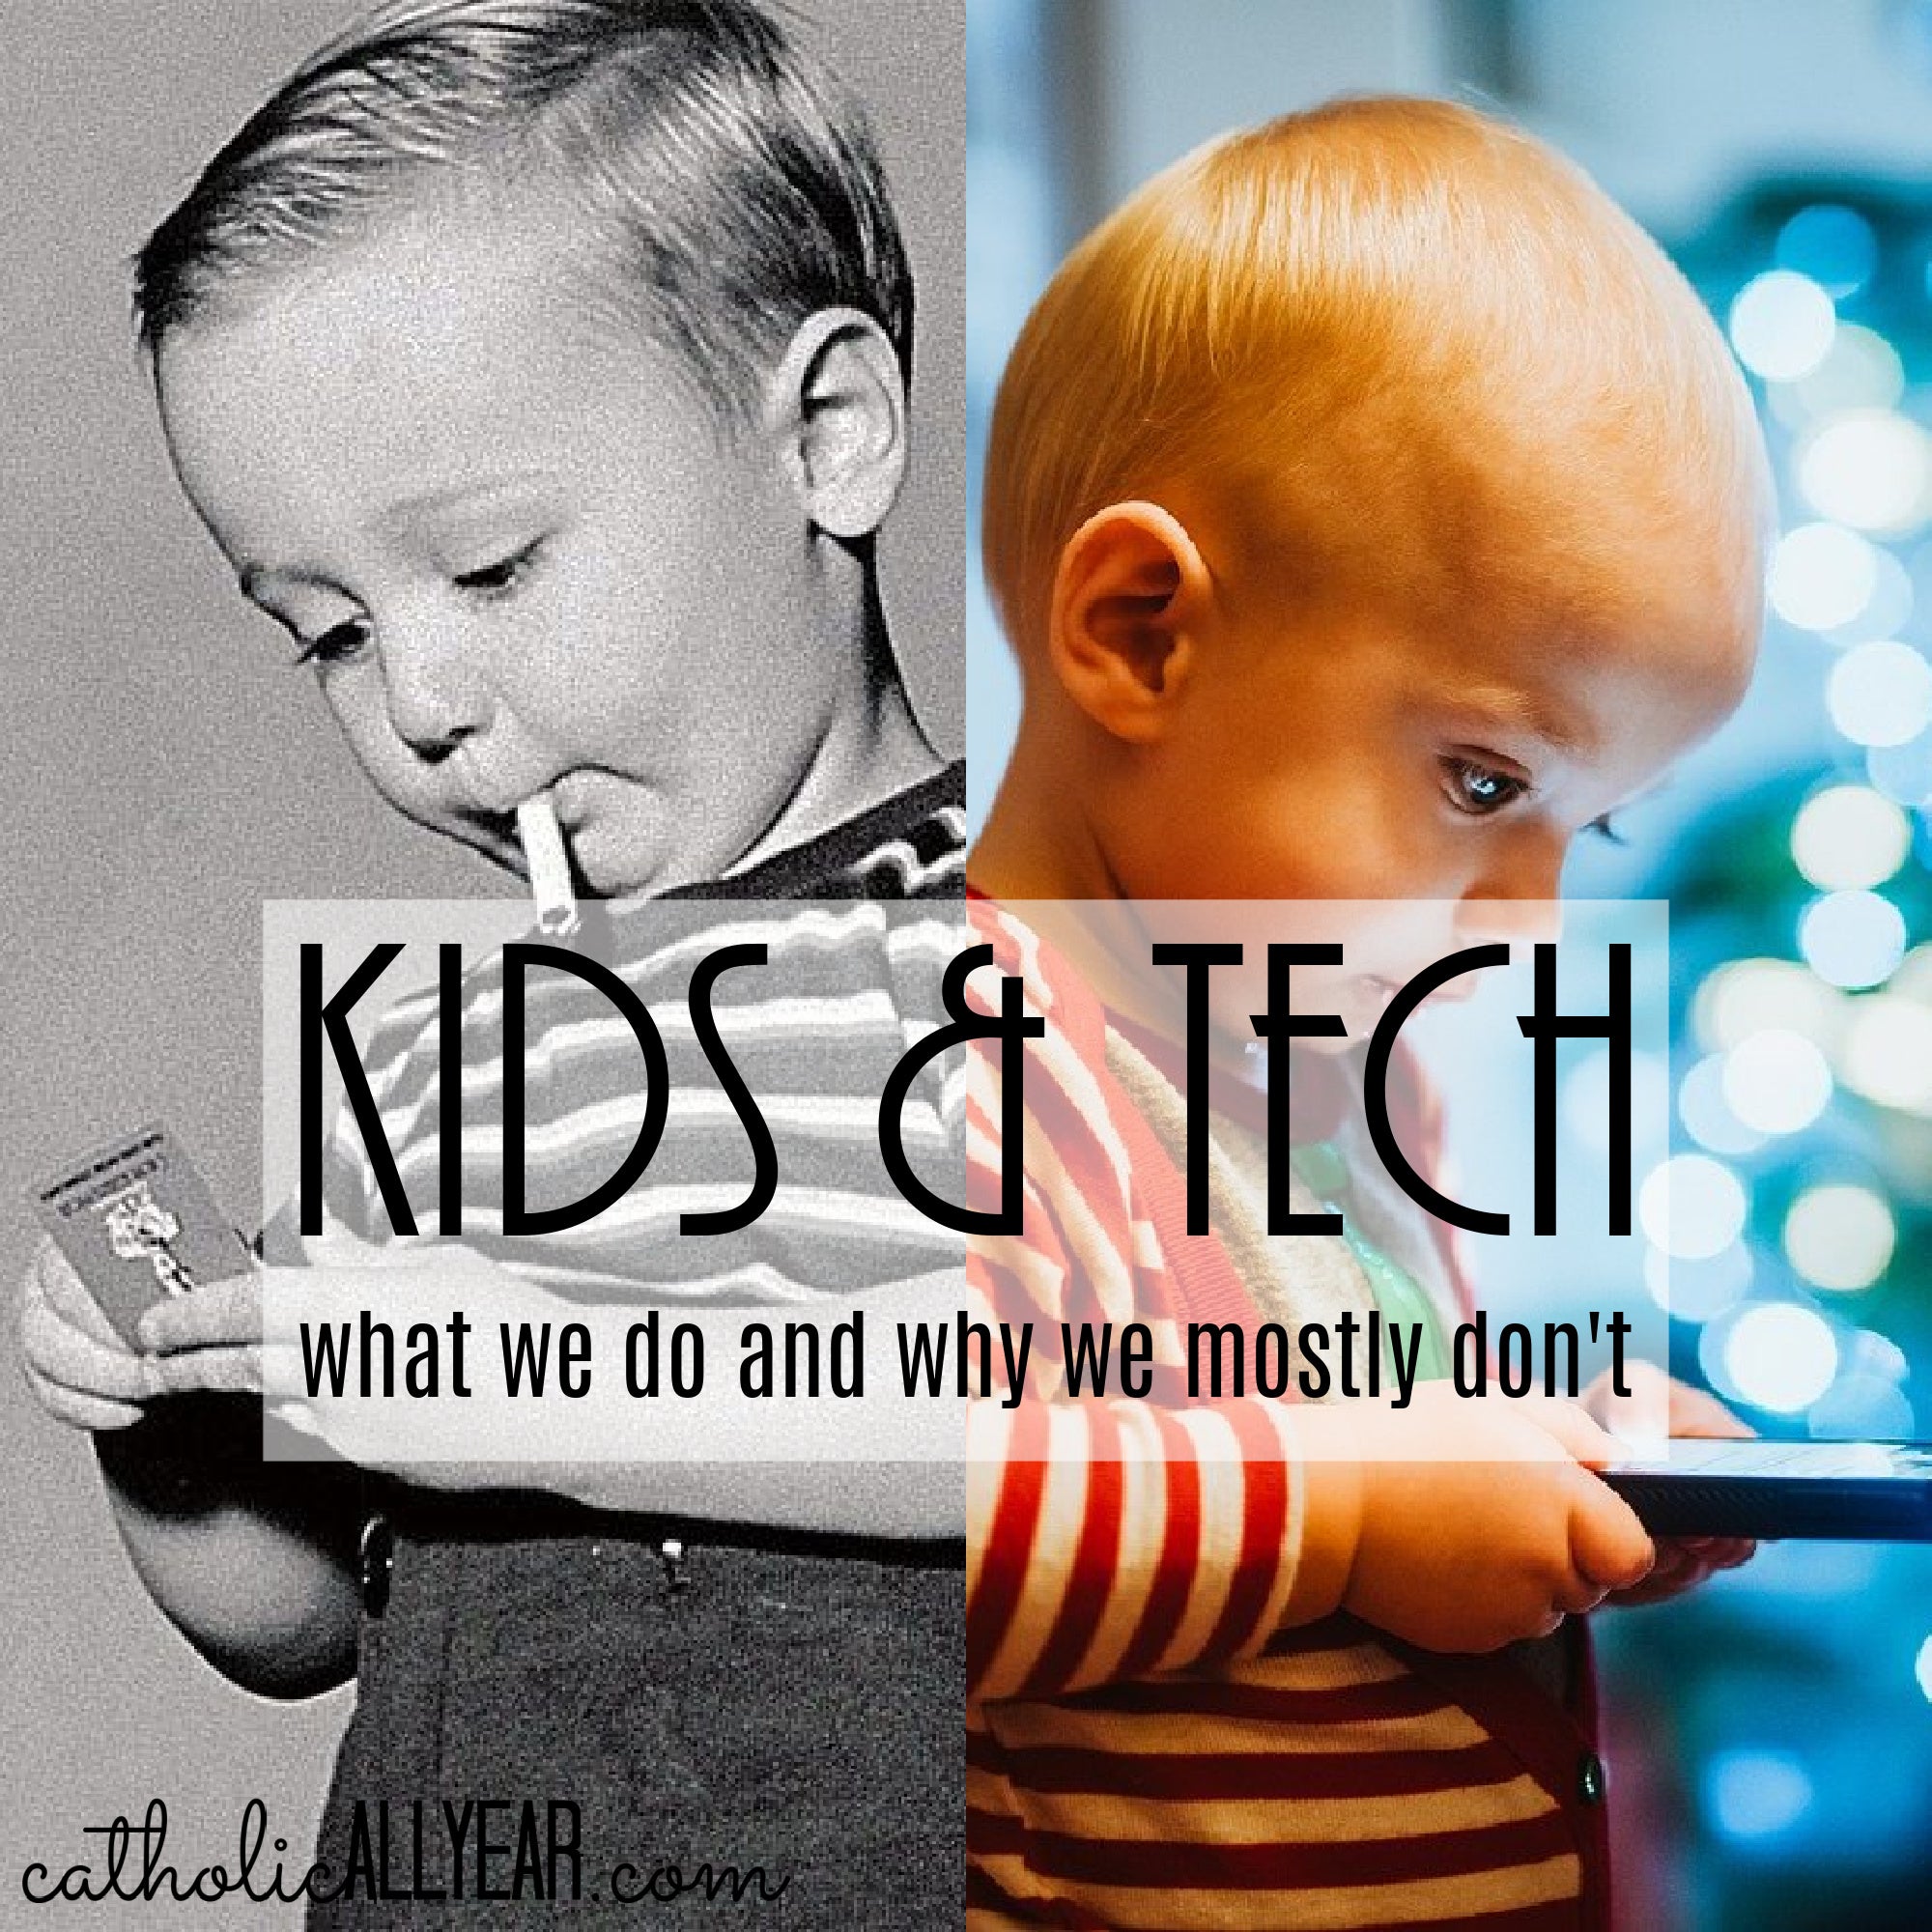 Kids & Tech: What We Do and Why We Mostly Don’t